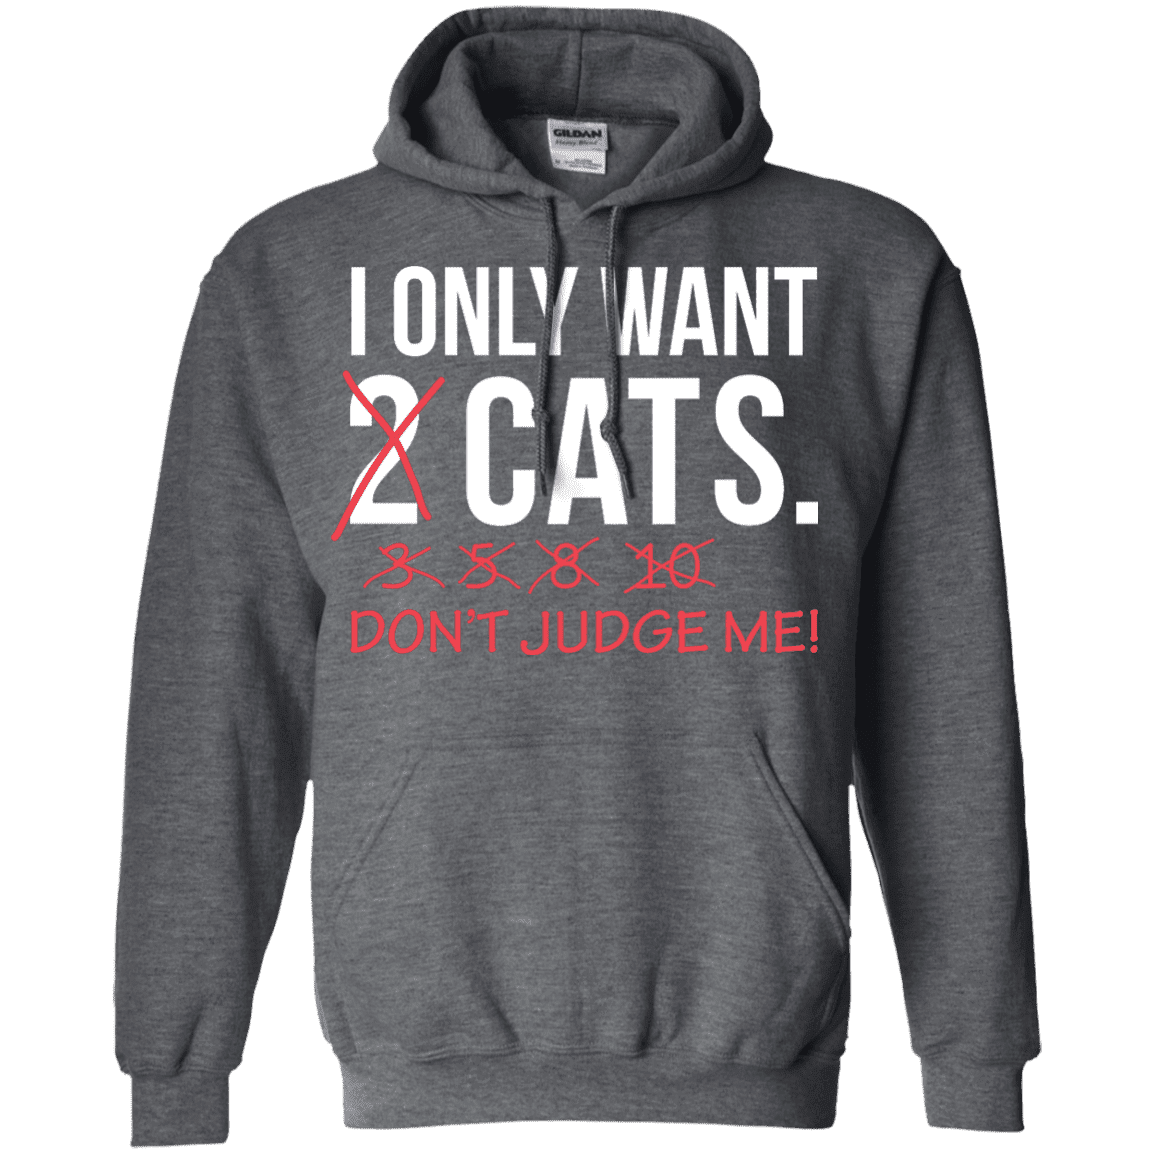 Only Want Cats - Hoodie.